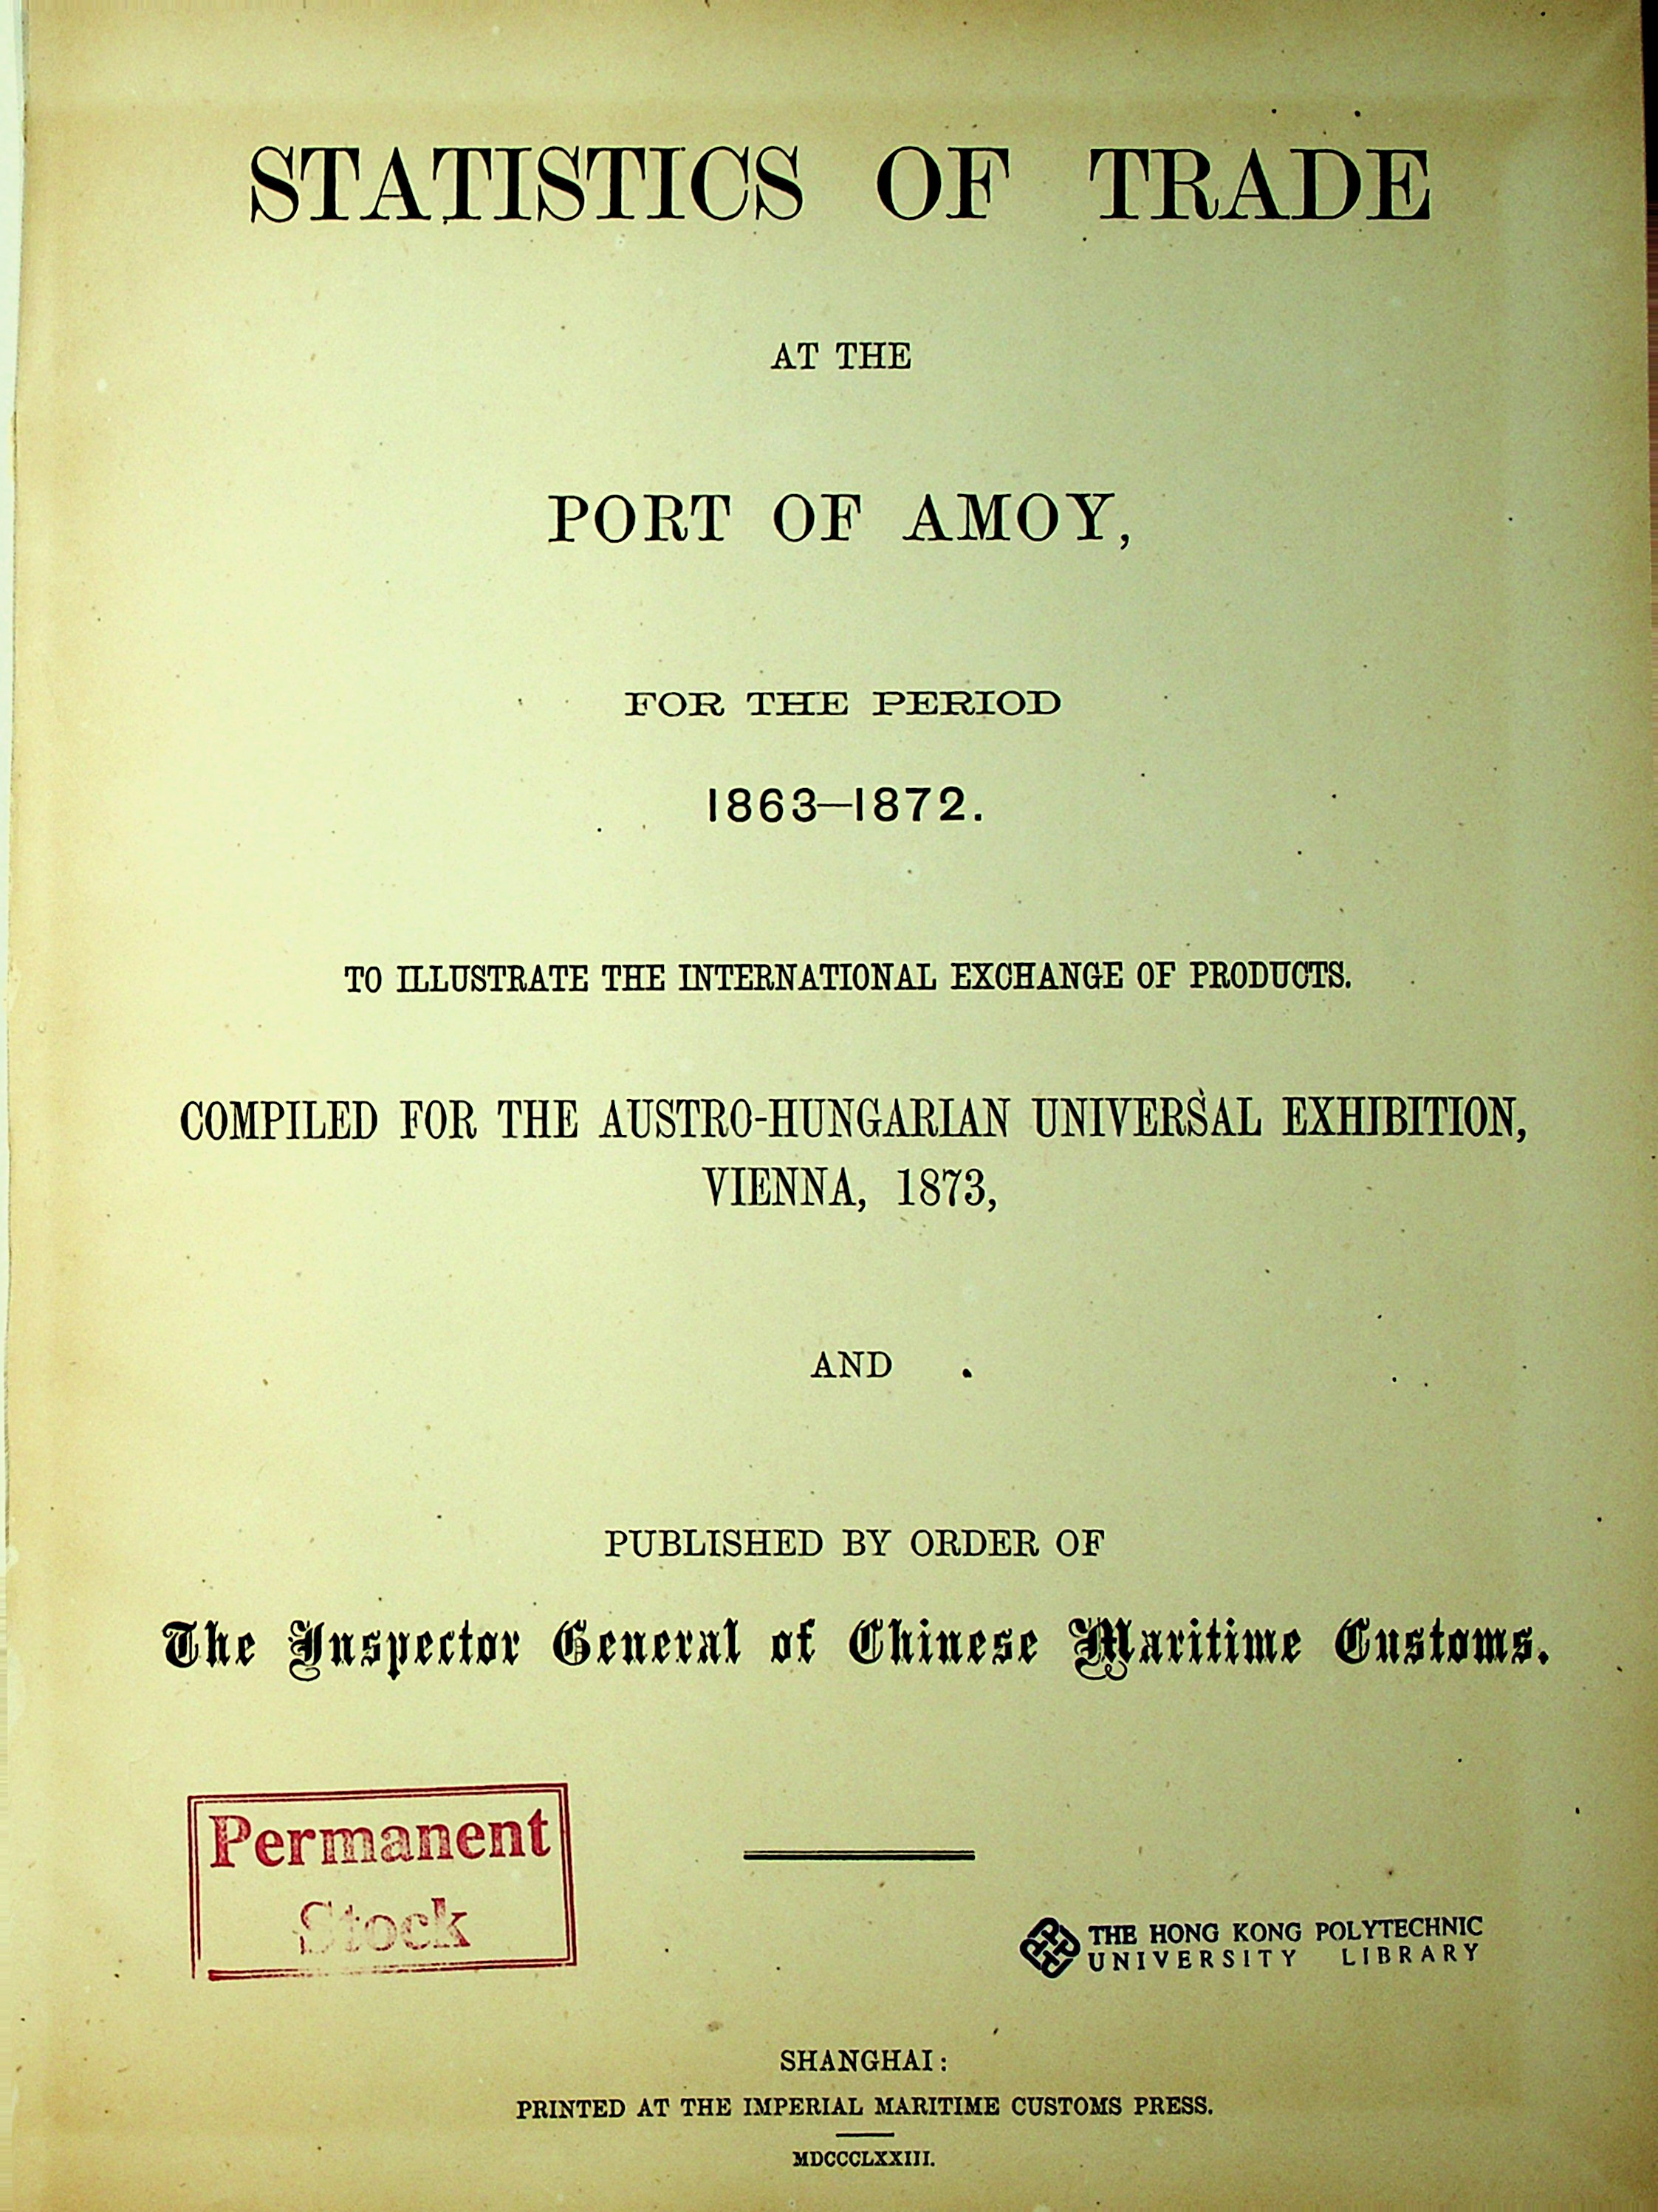 Statistics of trade at the port of Amoy, for the period 1863-1872